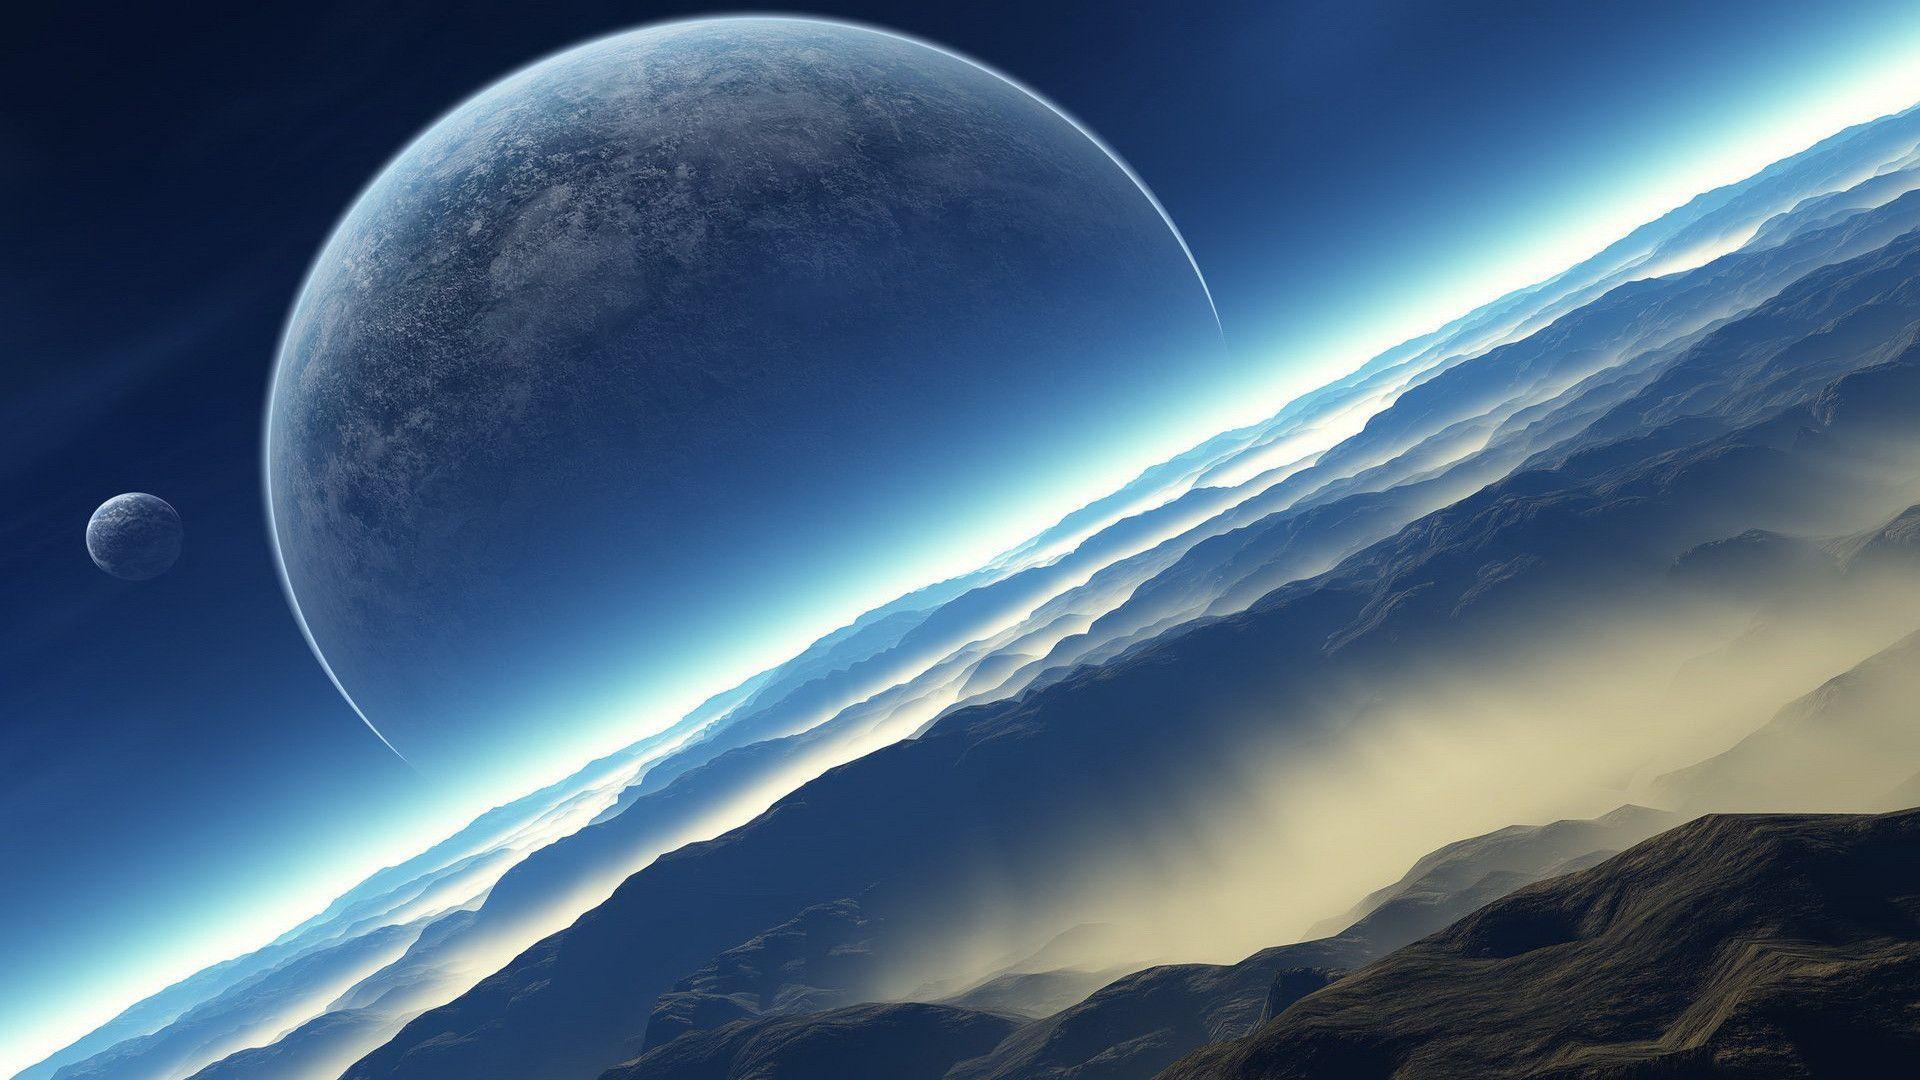 3D Wallpapers Hd Space 2014 Free 15 HD Wallpapers